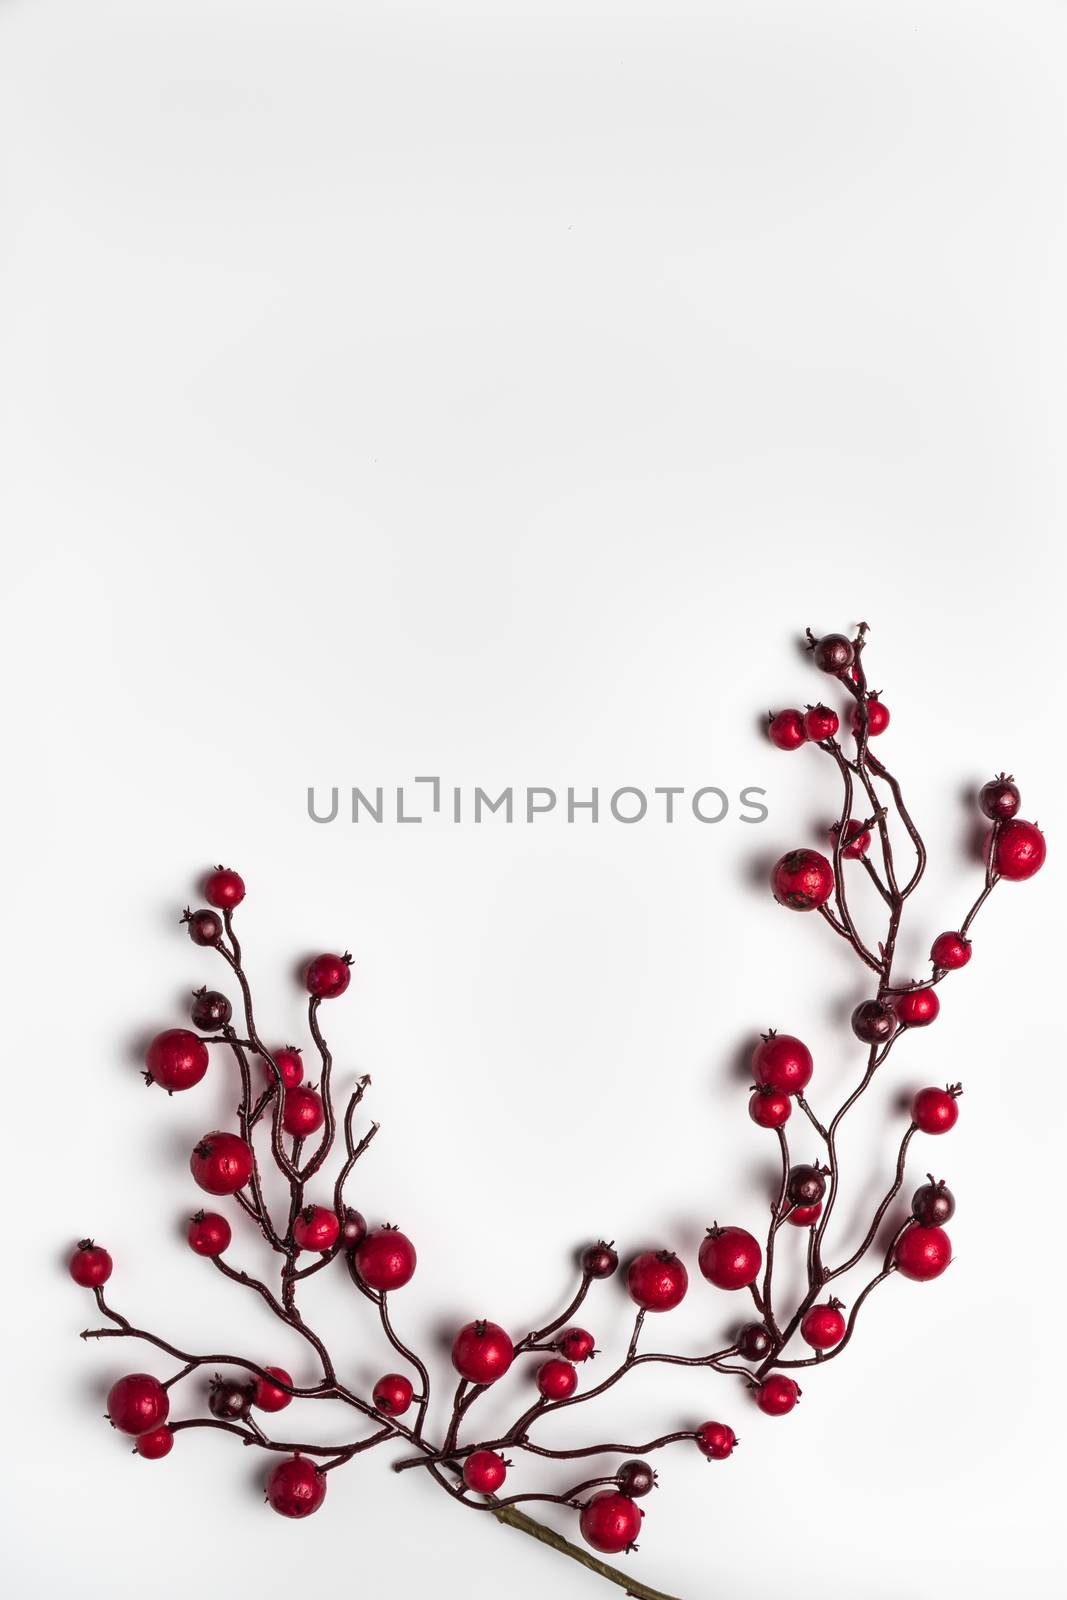 Red berries holly on white by AnaMarques